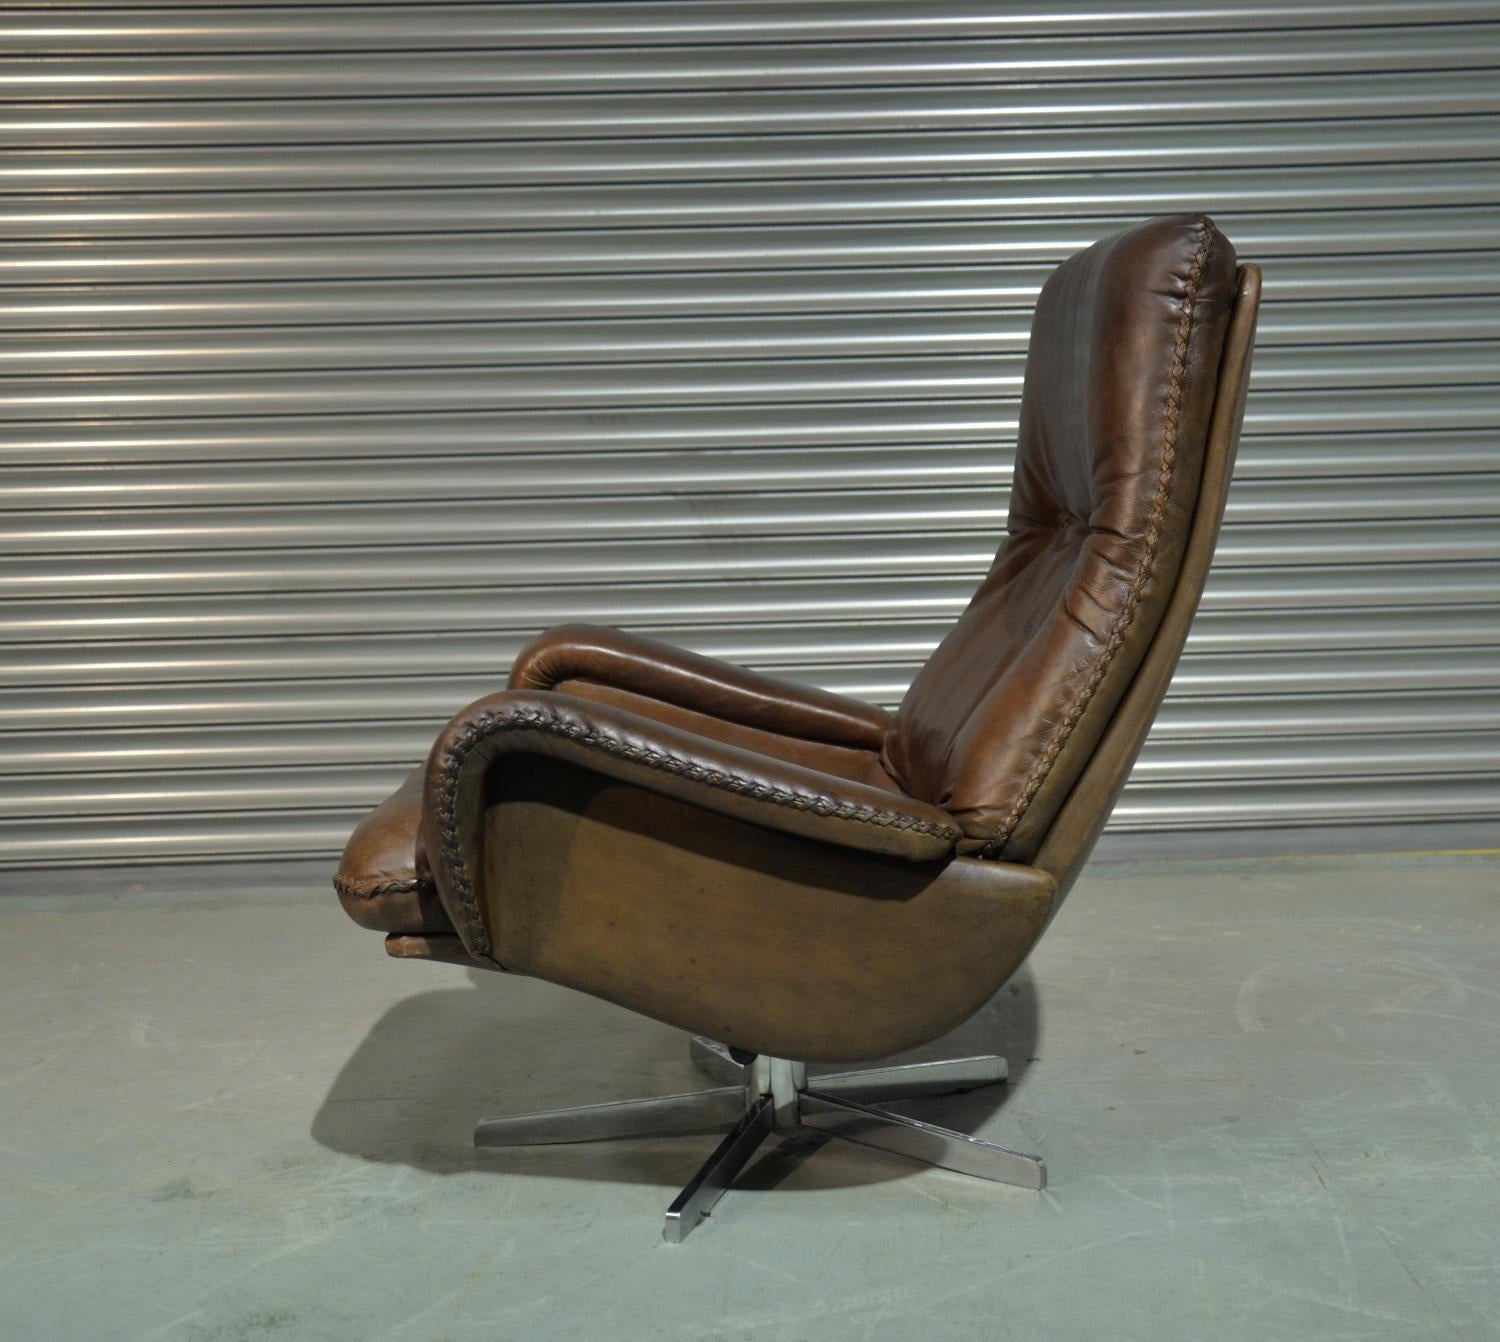 Discounted airfreight for our US and International customers ( from 2 weeks door to door)

We bring to you an ultra rare and highly desirable retro De Sede S 231 swivel lounge armchair and ottoman. Hand built in the late 1960s by De Sede craftsman